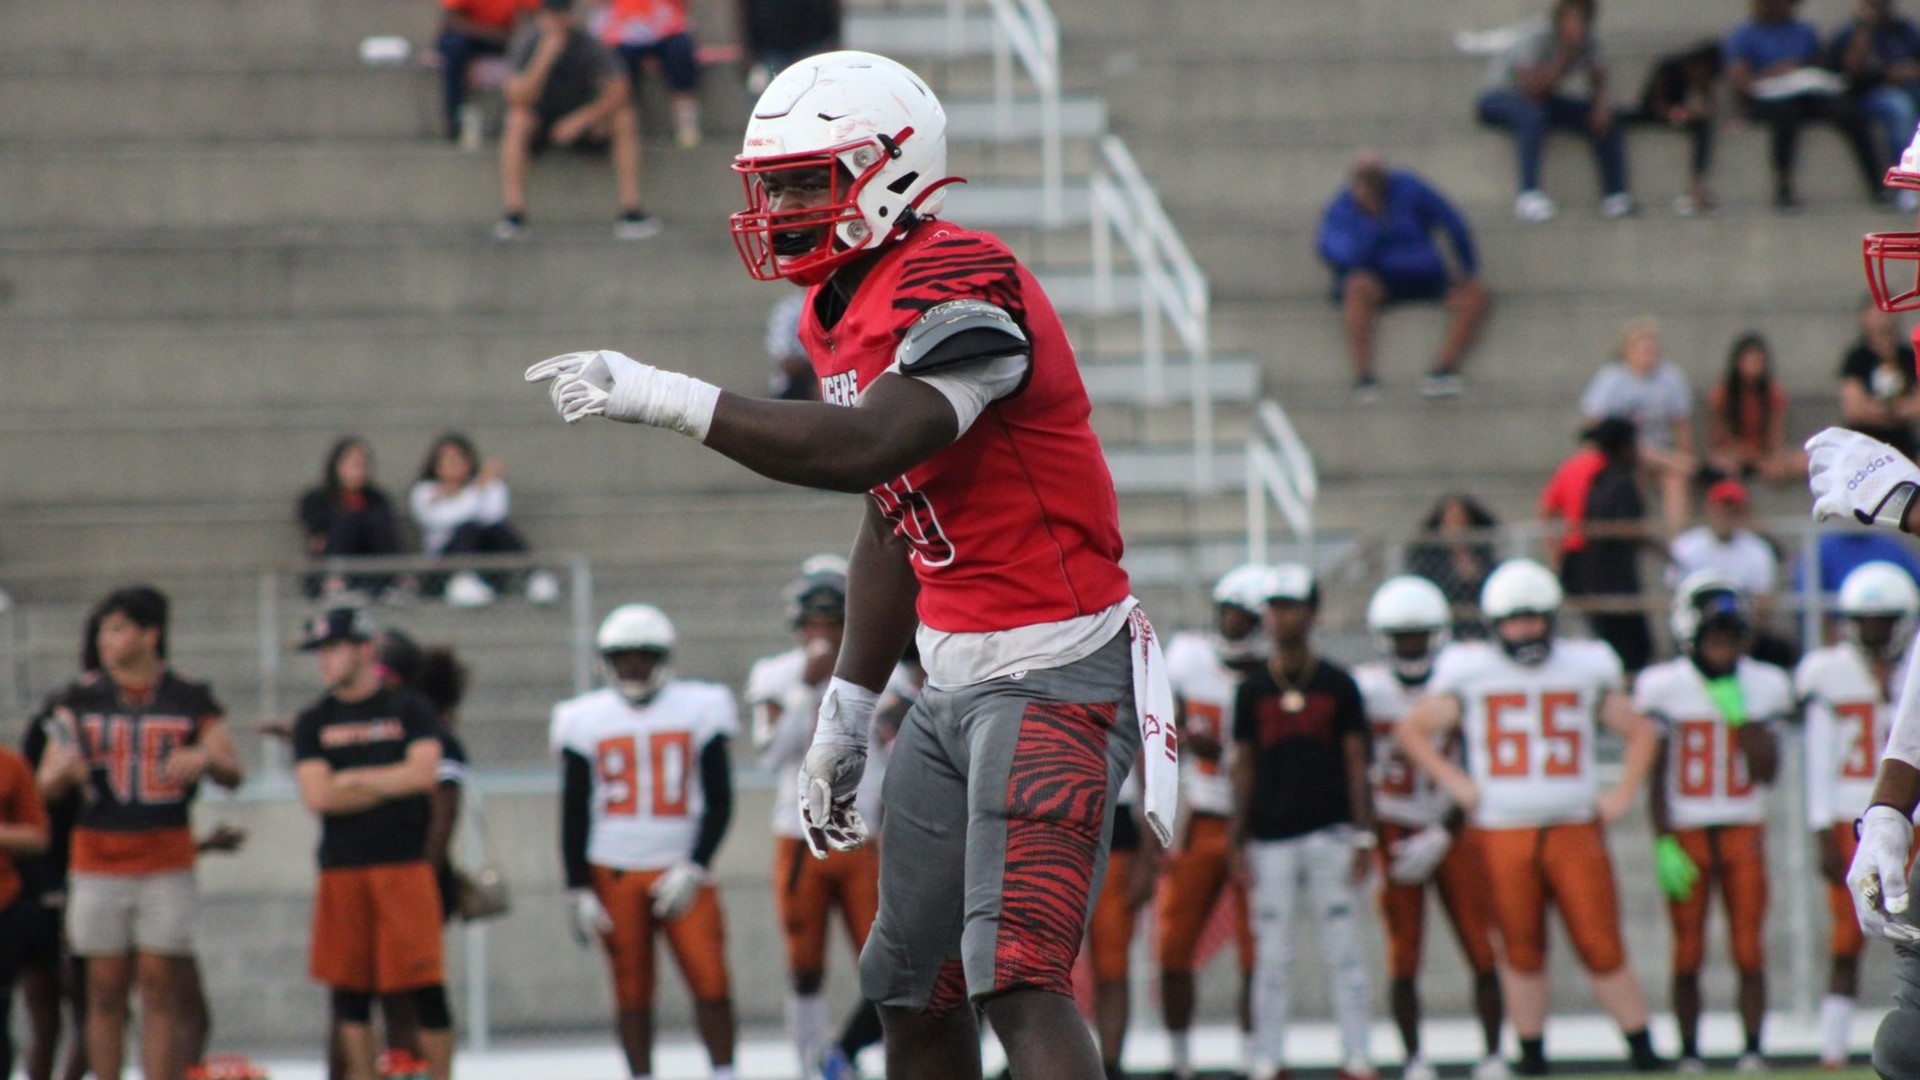 Howard is one of Florida’s top high school football prospects.